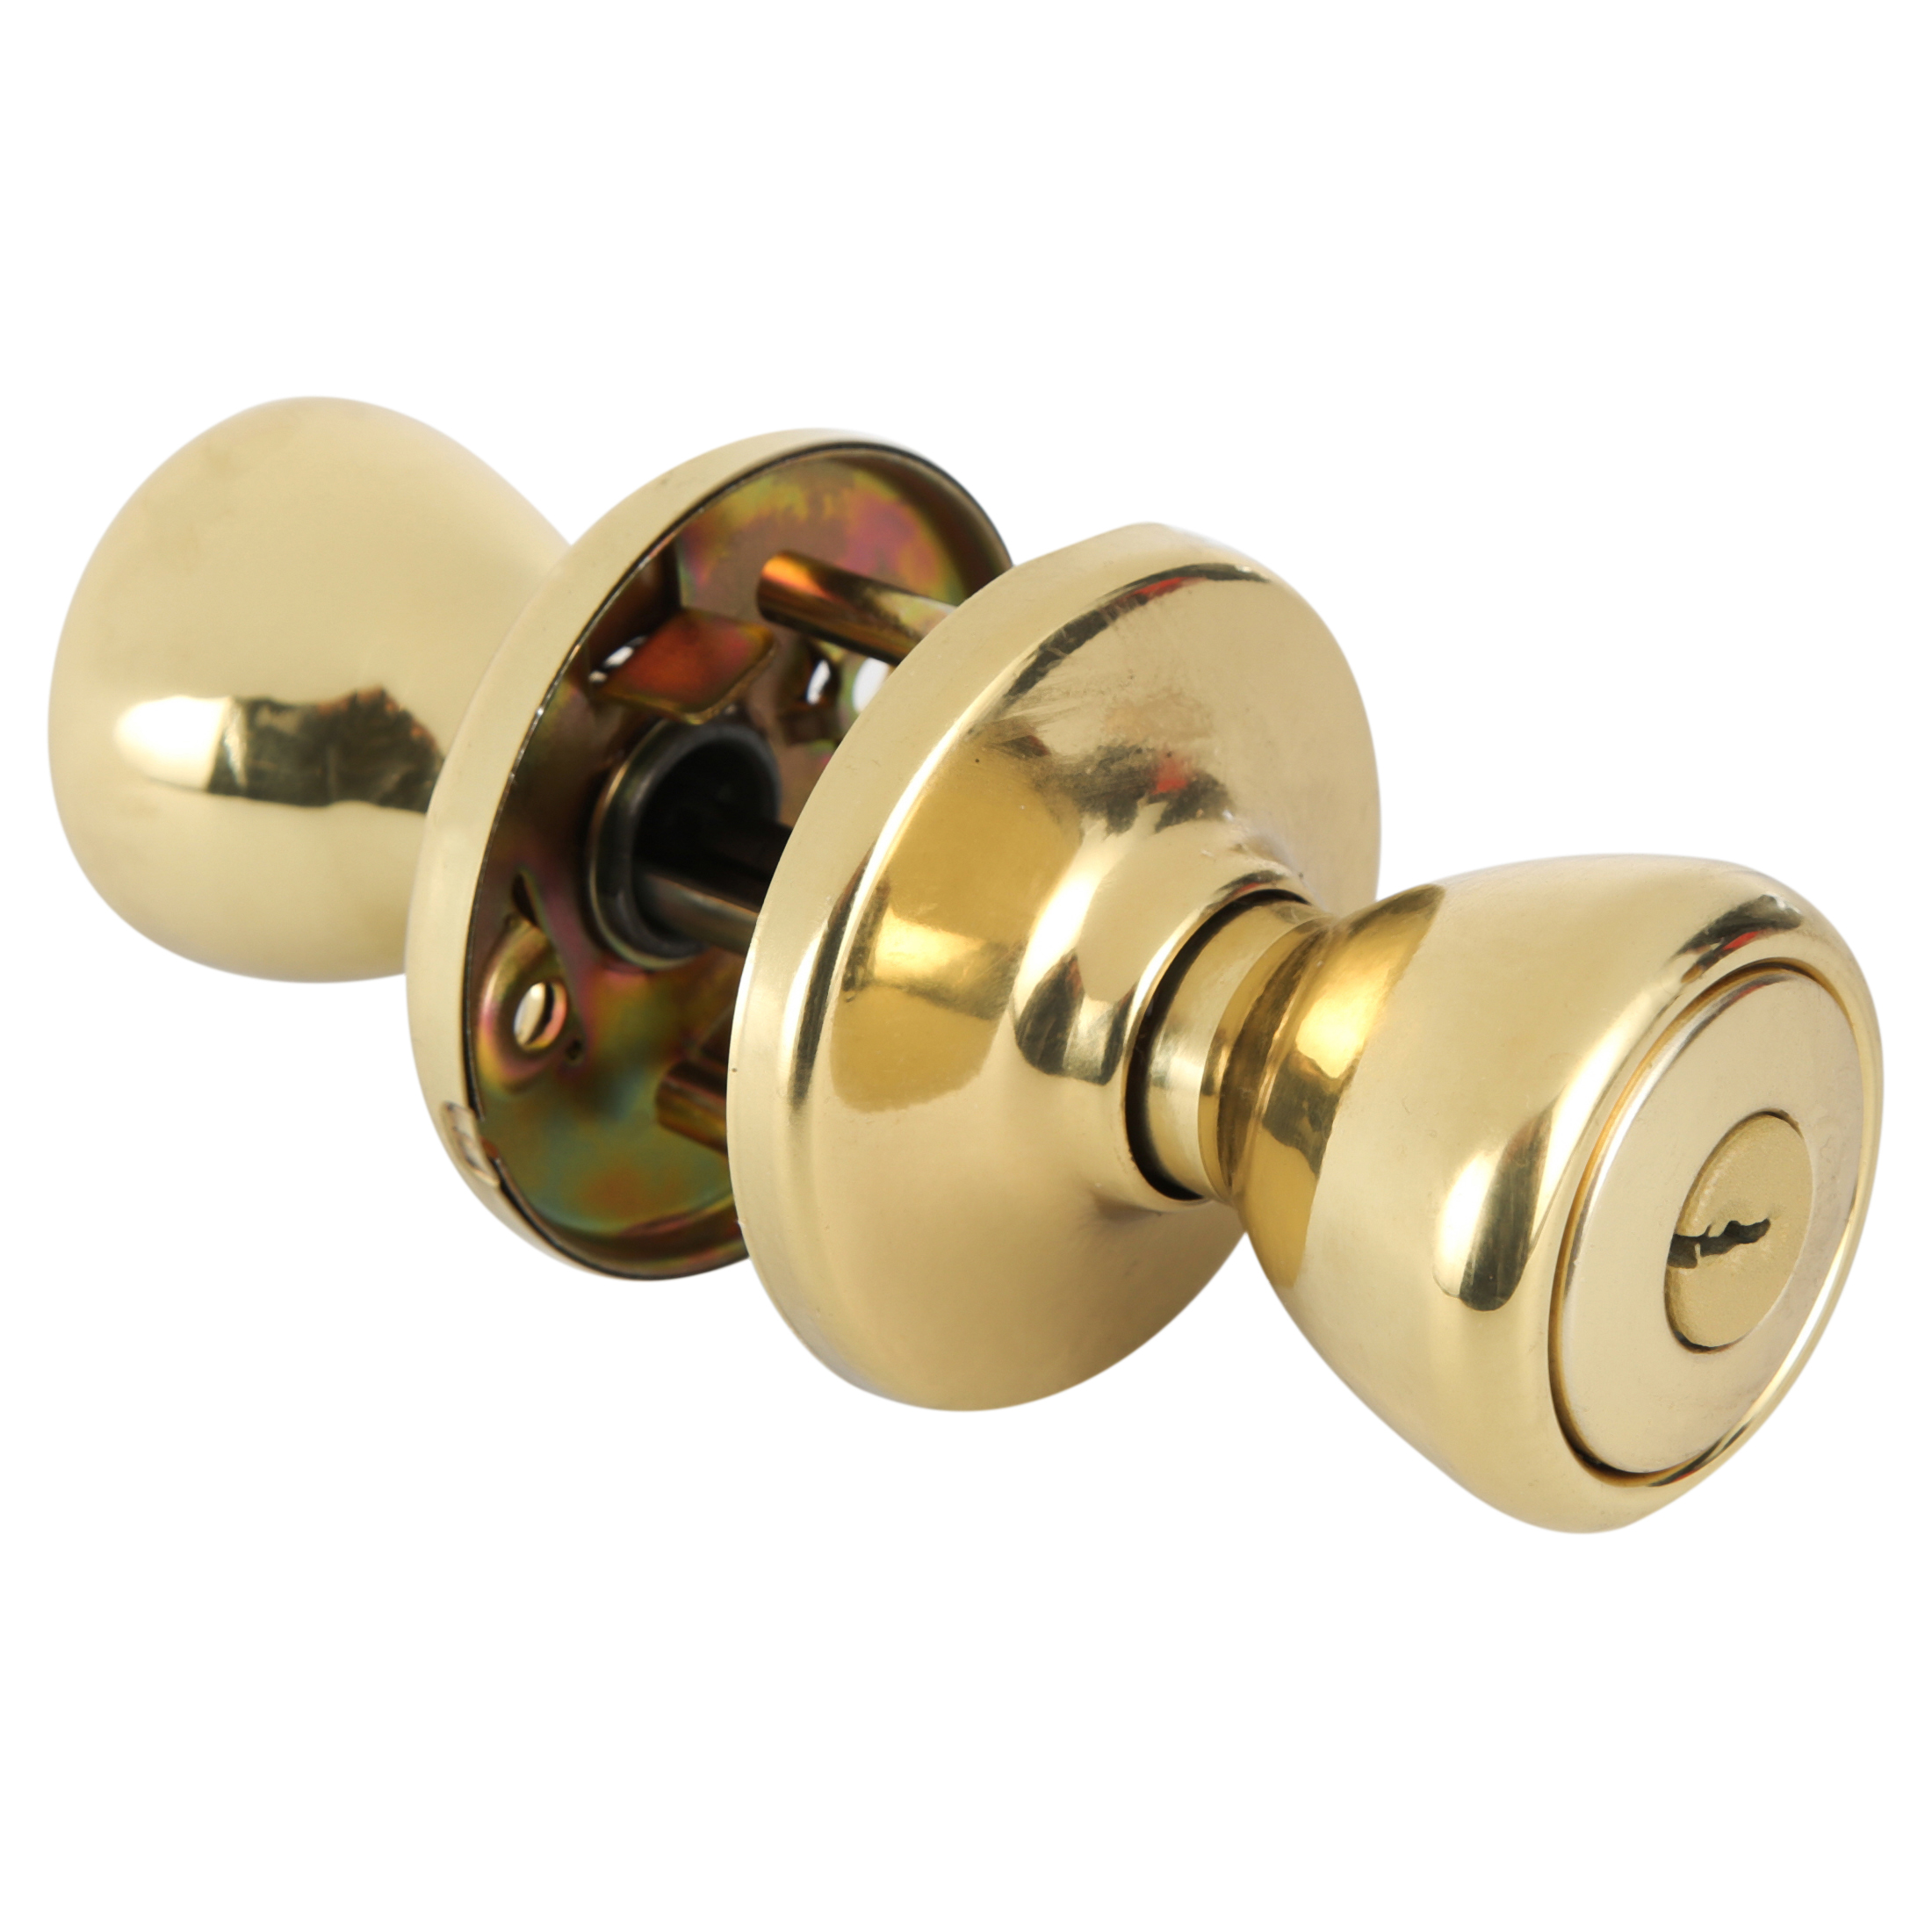 Kwikset 242 Tylo Keyed Entry Knob And Sgl Cyl Deadbolt Project Pack in PB 